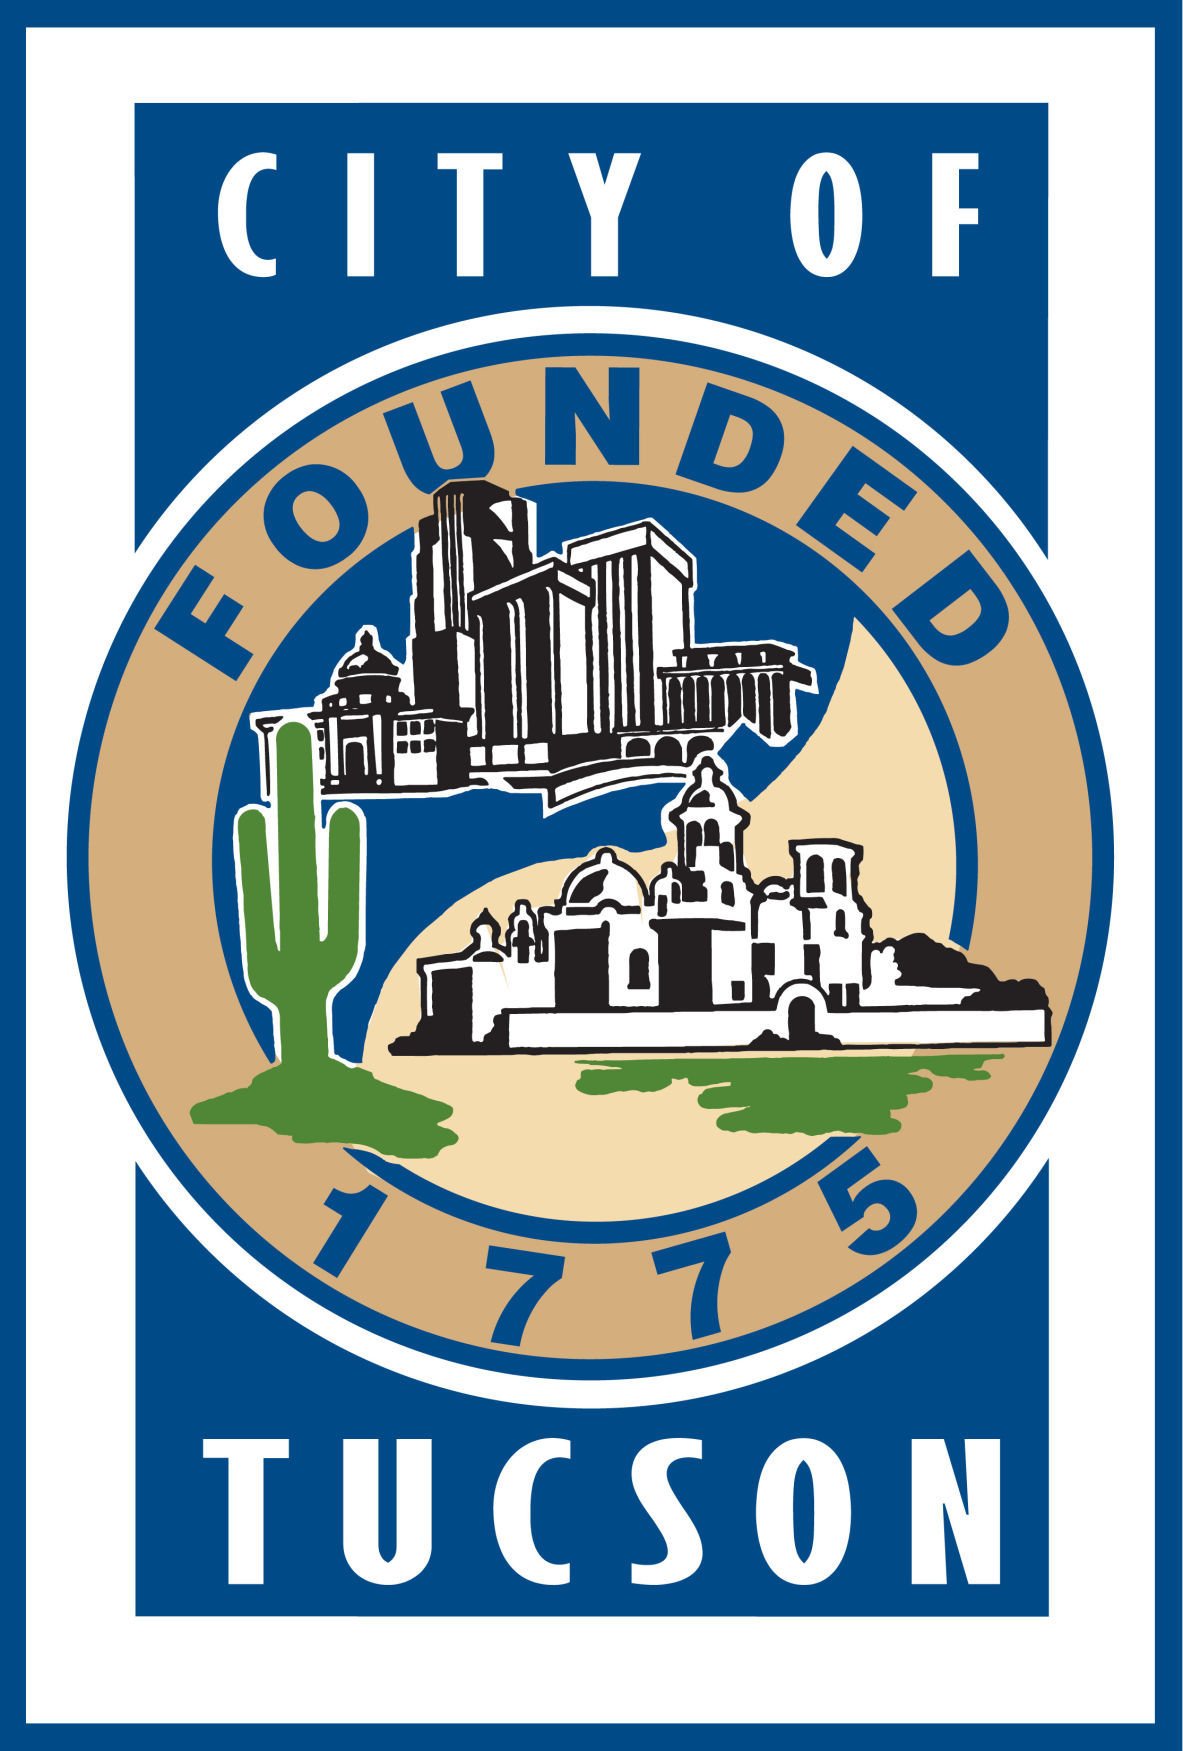 More than 200 Tucson safety workers paid more than 100,000 Arizona